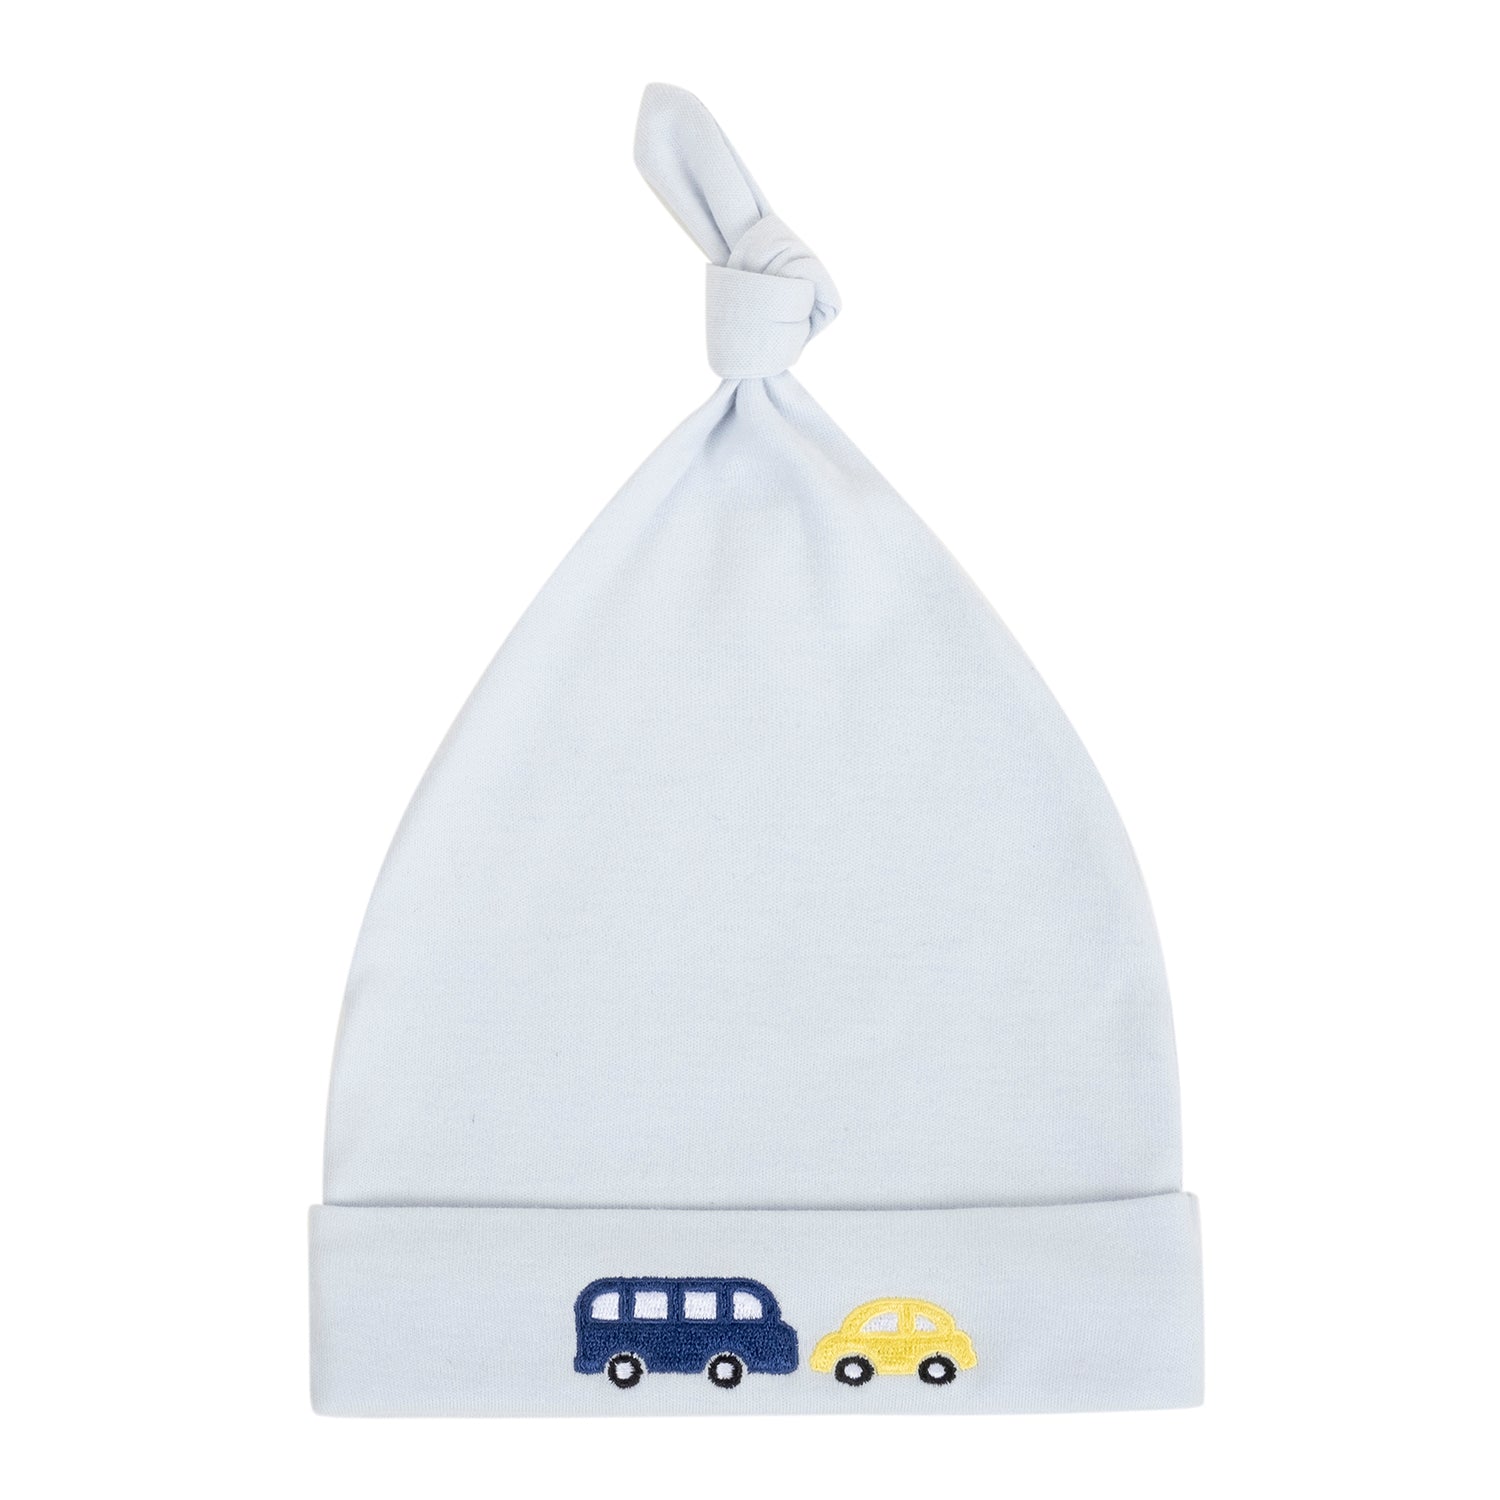 Baby Moo Tiny Traveler Knotted Infants Ultra Soft 100% Cotton All Season Pack of 3 Caps - Blue